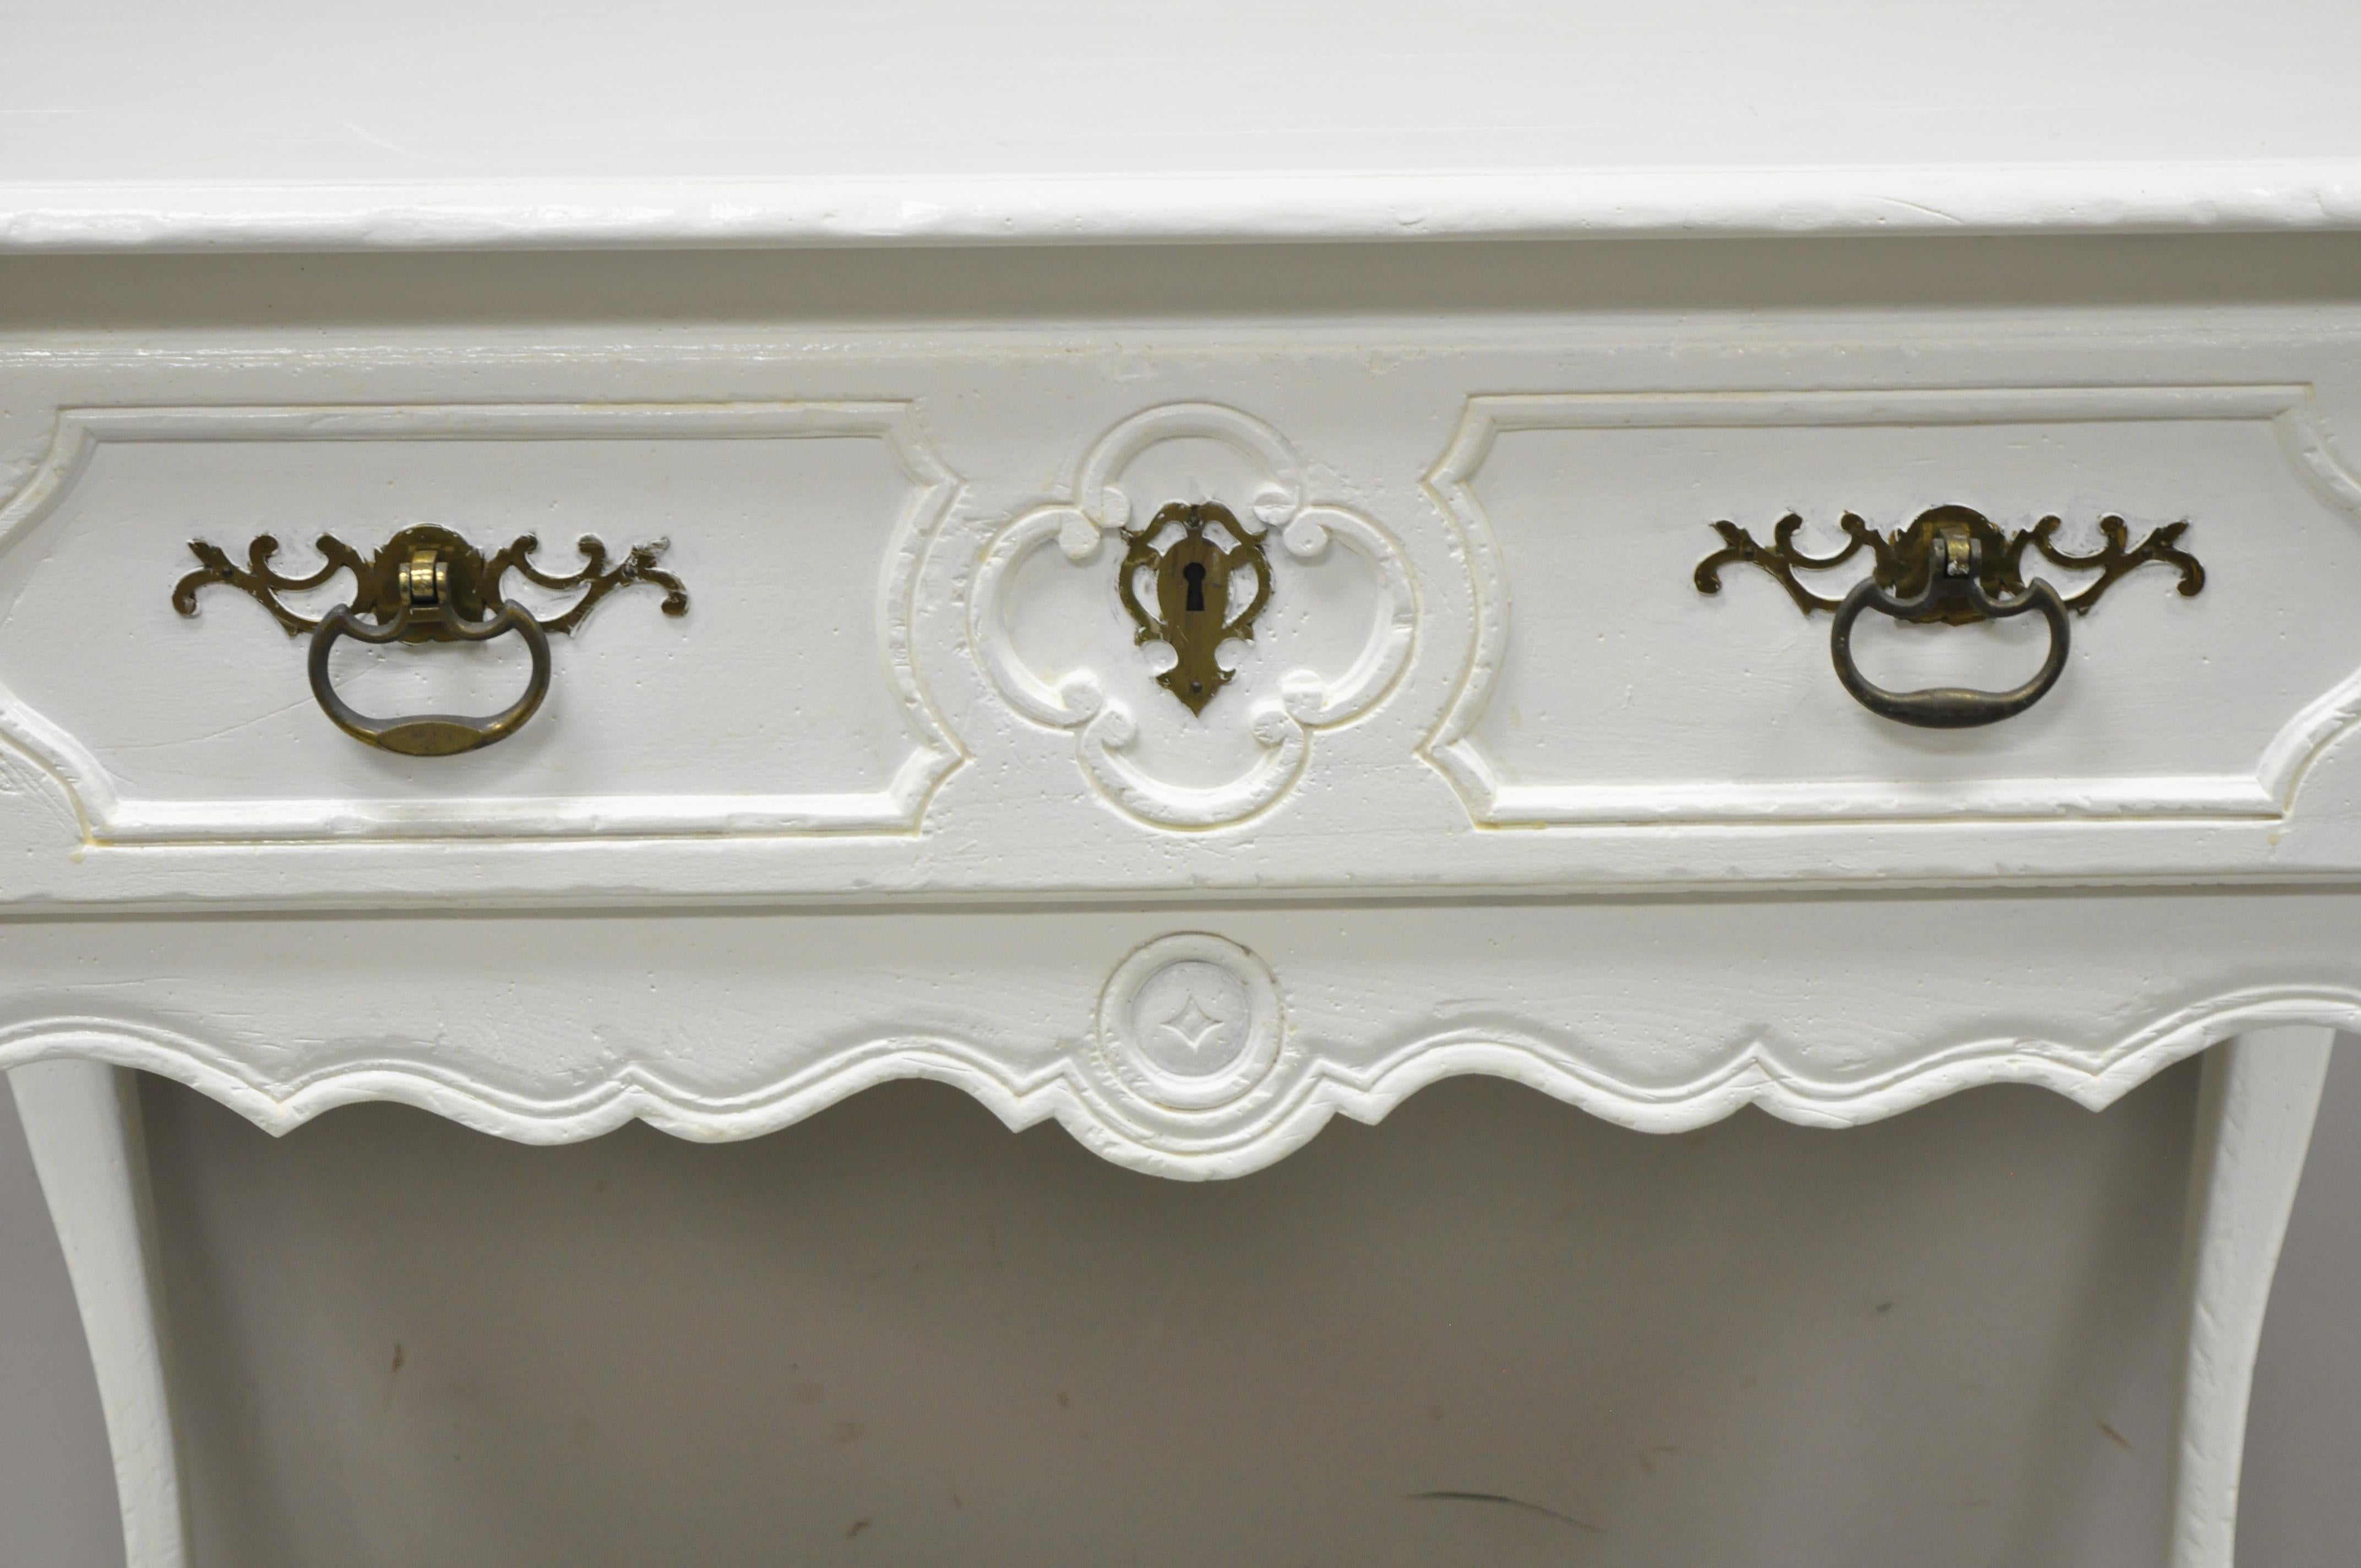 french country console table